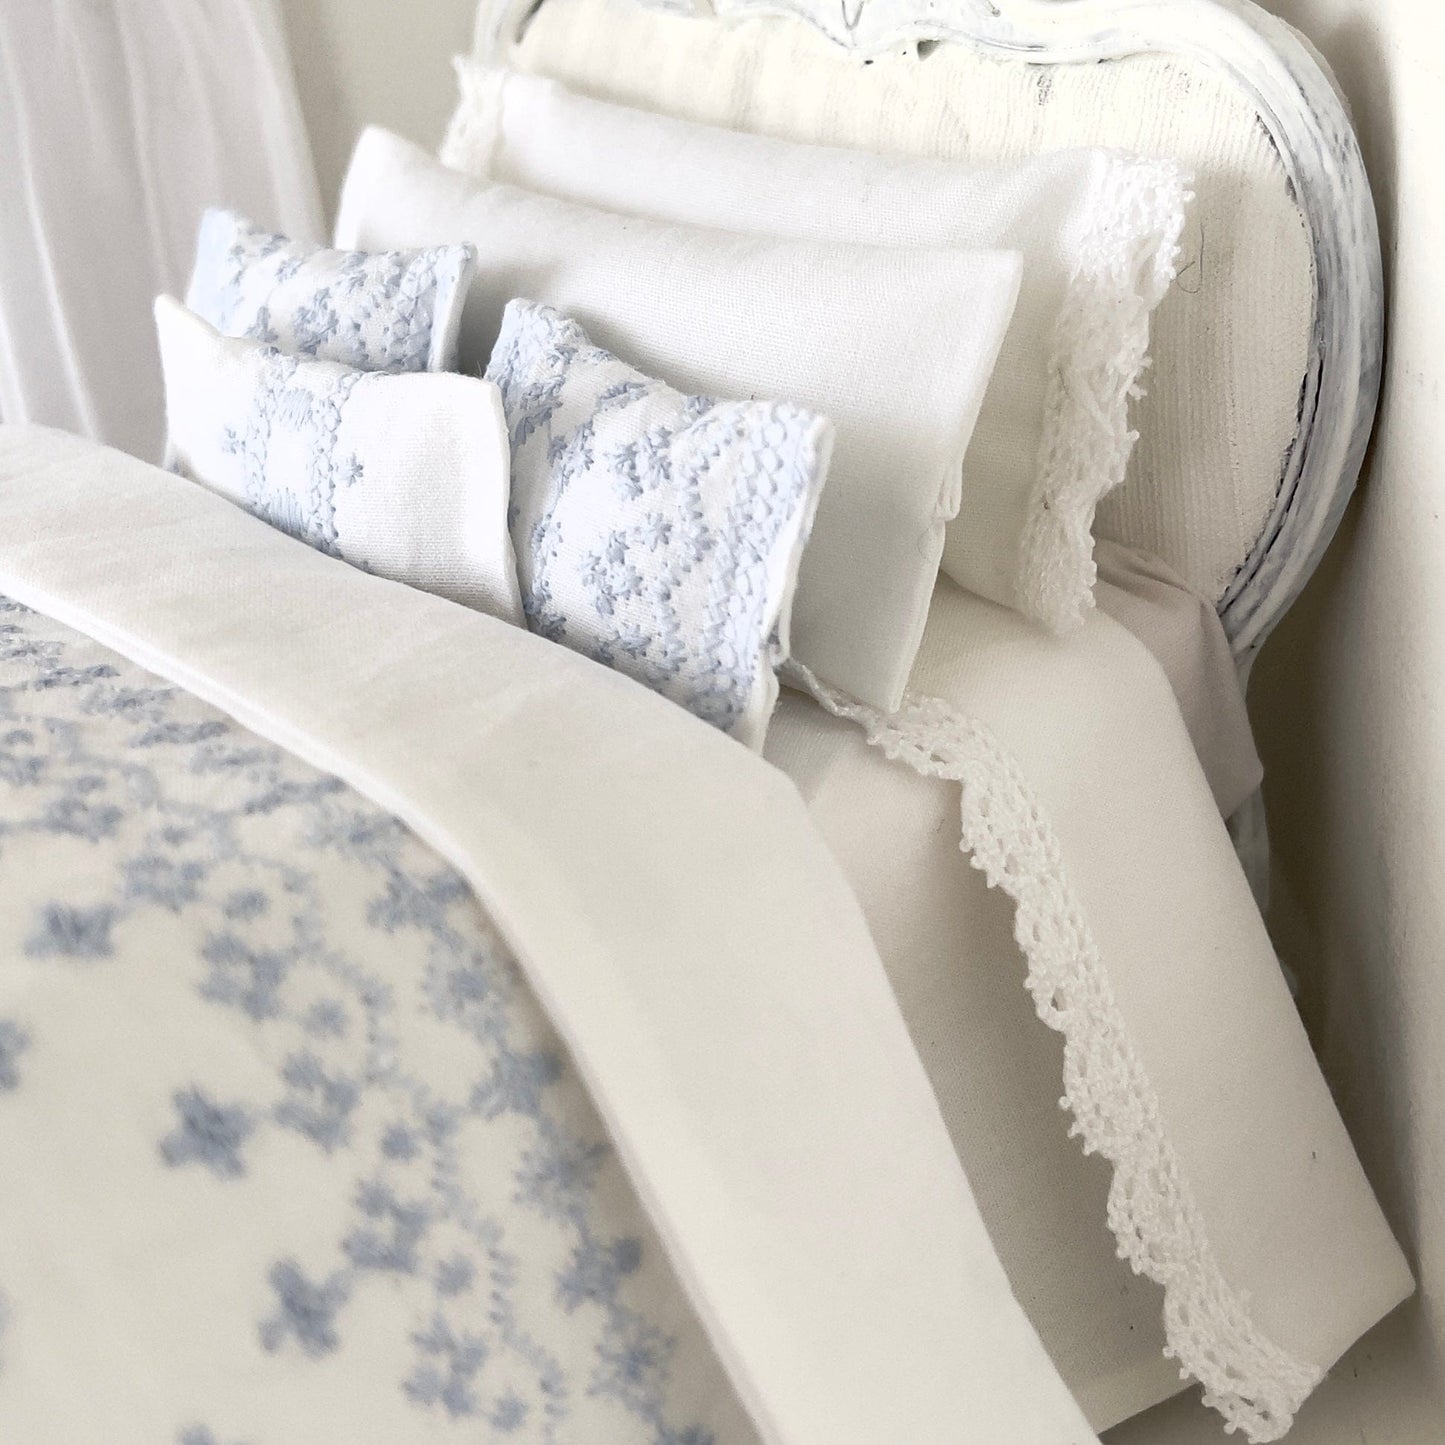 Chantallena Doll House Shabby Cottage | White Cotton Set with Pale Blue Embroidery Bed Runner | Ariel